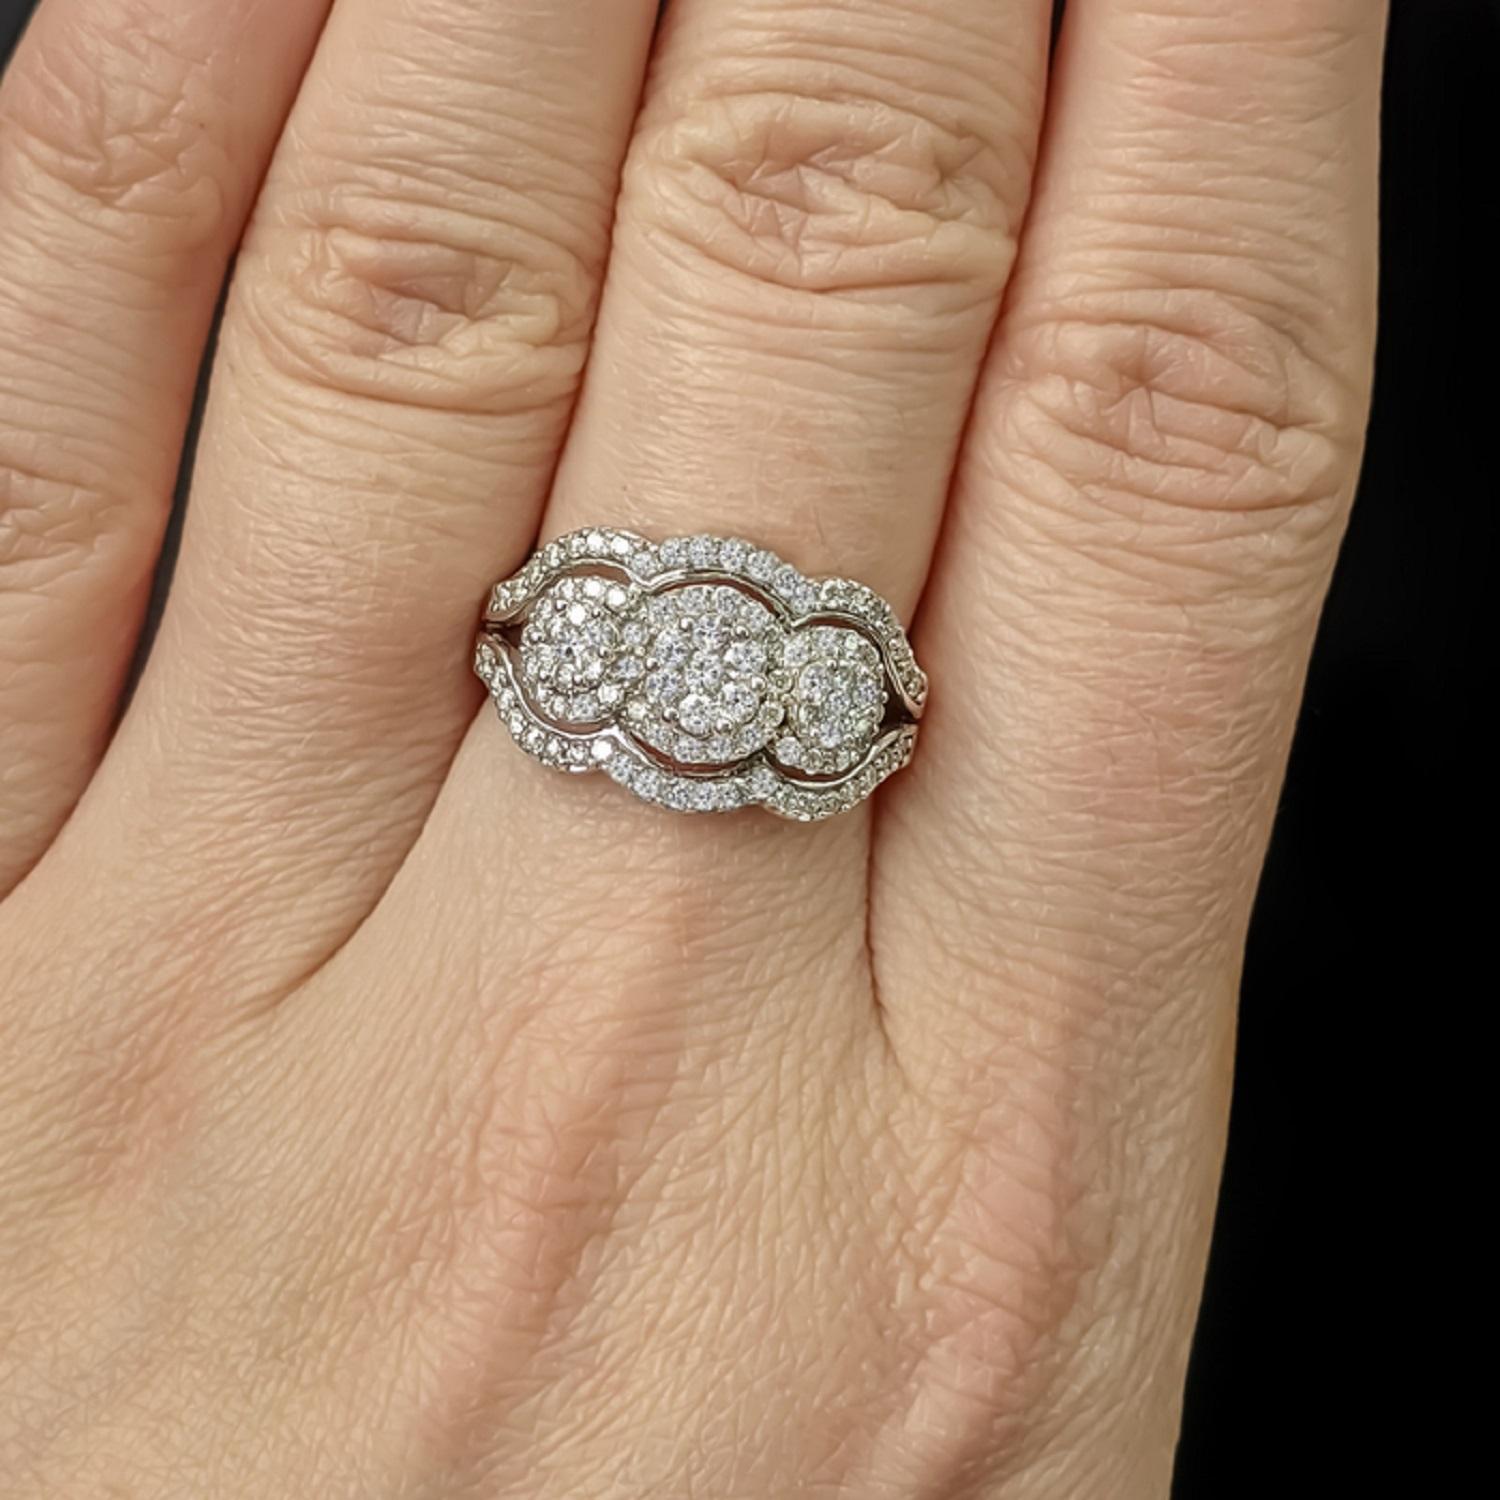 Beautifully made ring with 1.25ct of natural diamonds. The diamonds are white (colorless) and do not have any visible imperfections. The diamonds are all well-cut and have very nice sparkle. They are pave and illusion set together which means the